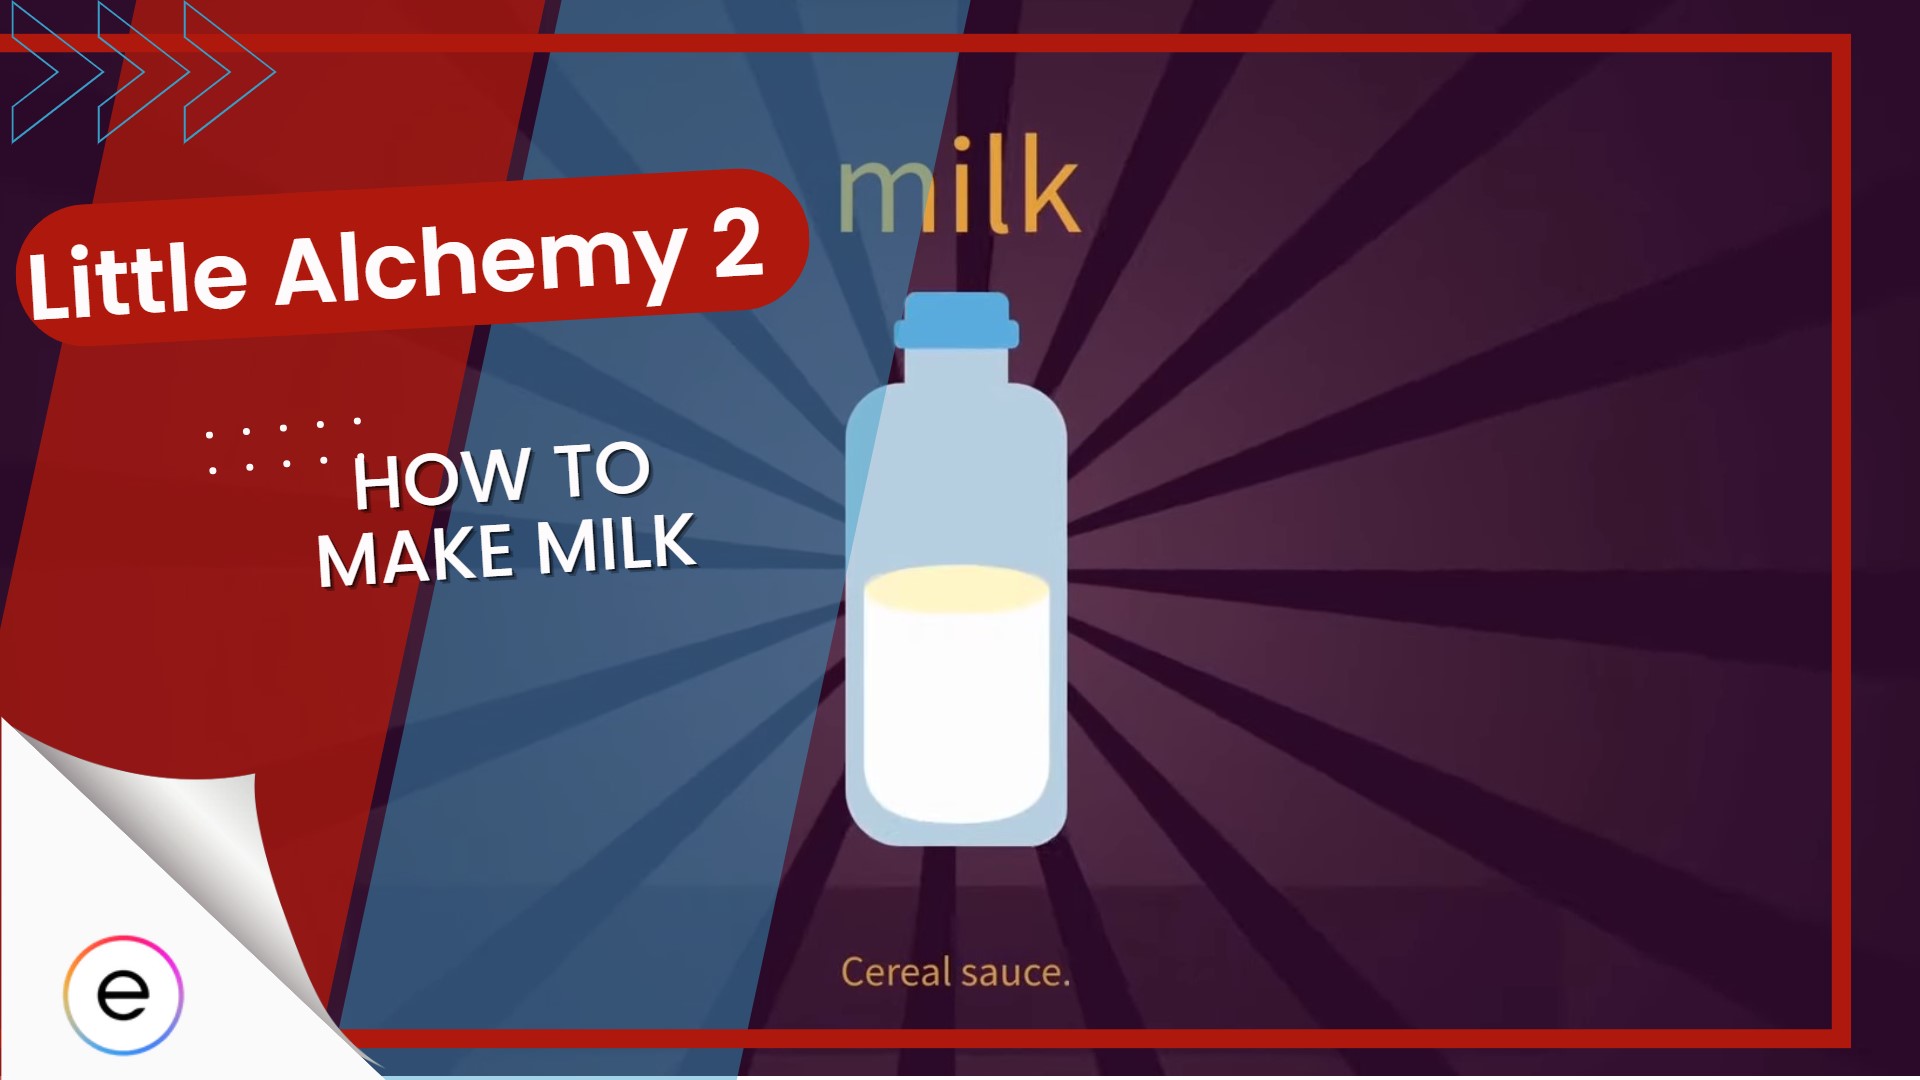 How to Make Milk in Little Alchemy 2 (Step-by-Step) - 𝐂𝐏𝐔𝐓𝐞𝐦𝐩𝐞𝐫